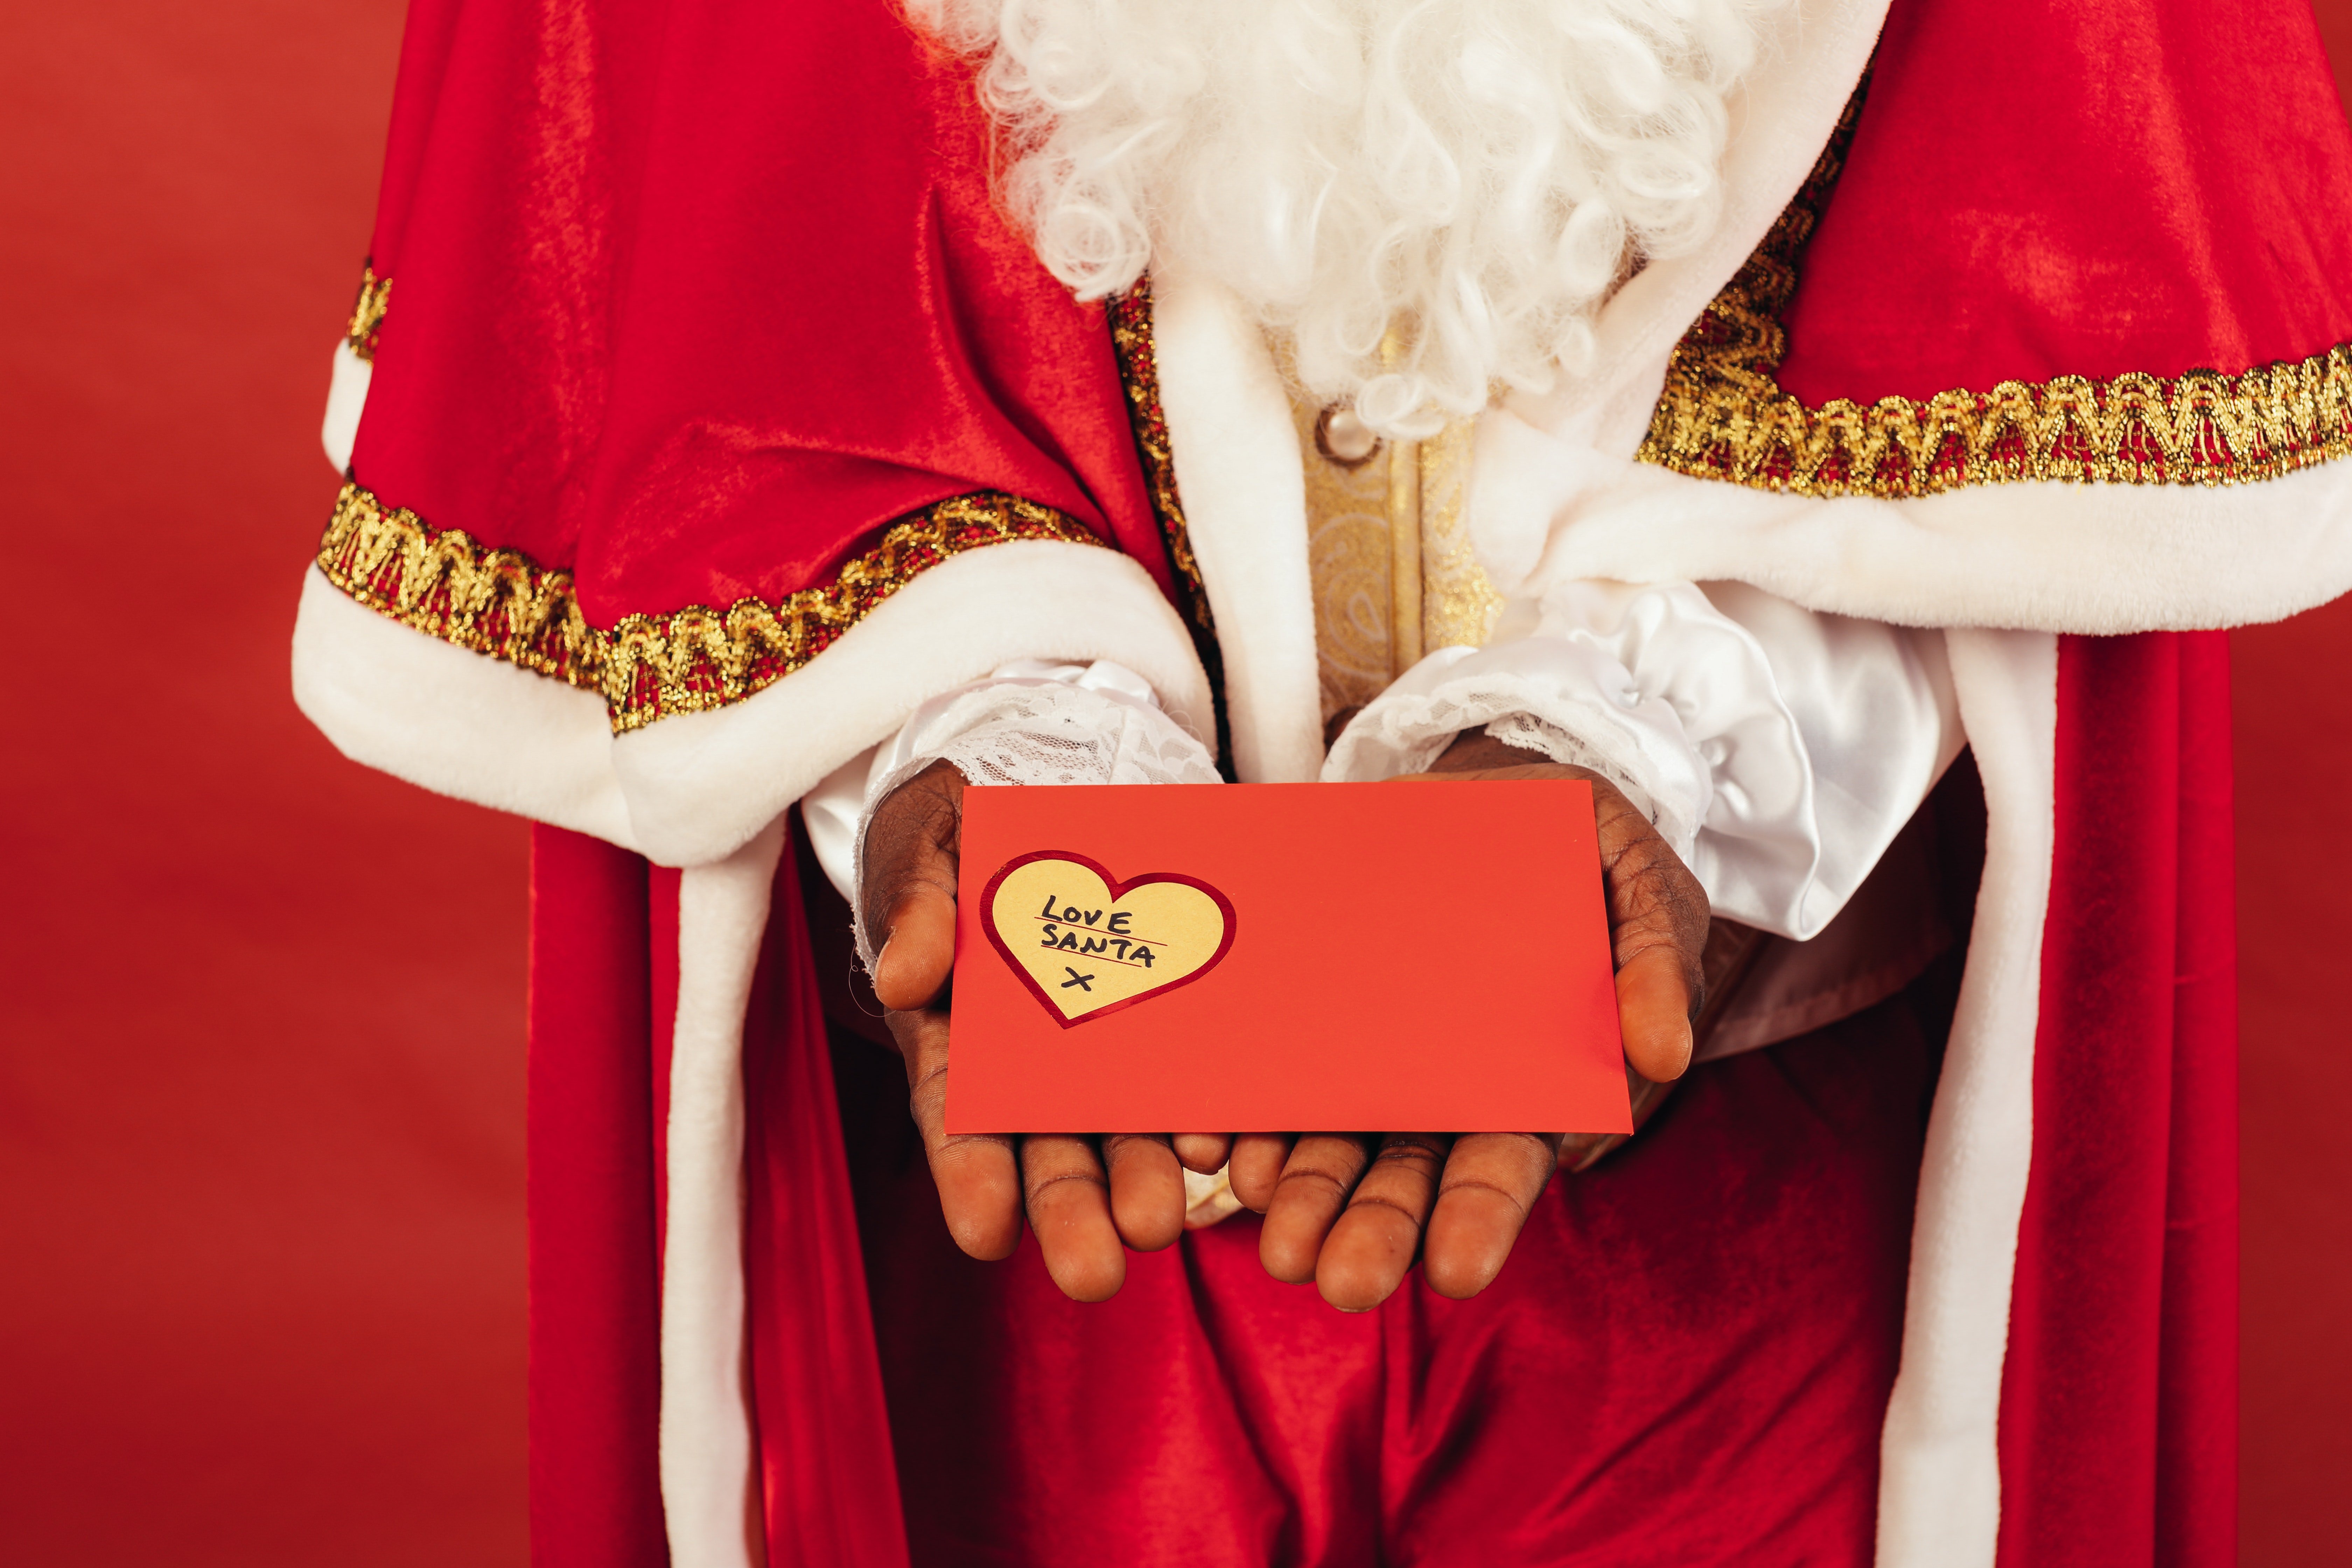 A person wearing Santa's outfit and holding a red envelope with a heart inscription on it. | Photo: Pexels